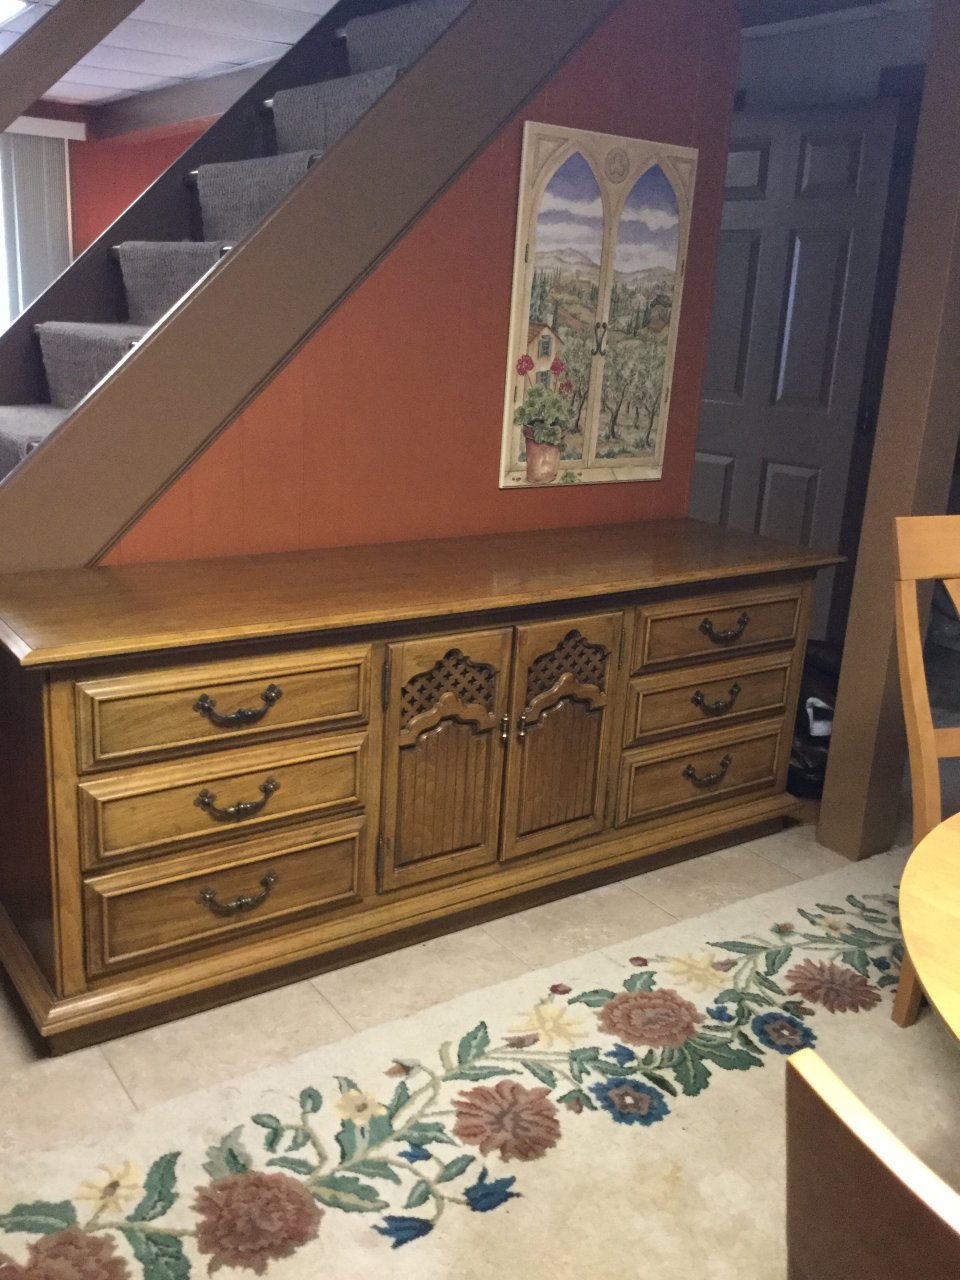 I Purchased This Thomasville Bedroom Set In 1965. What Might Be The